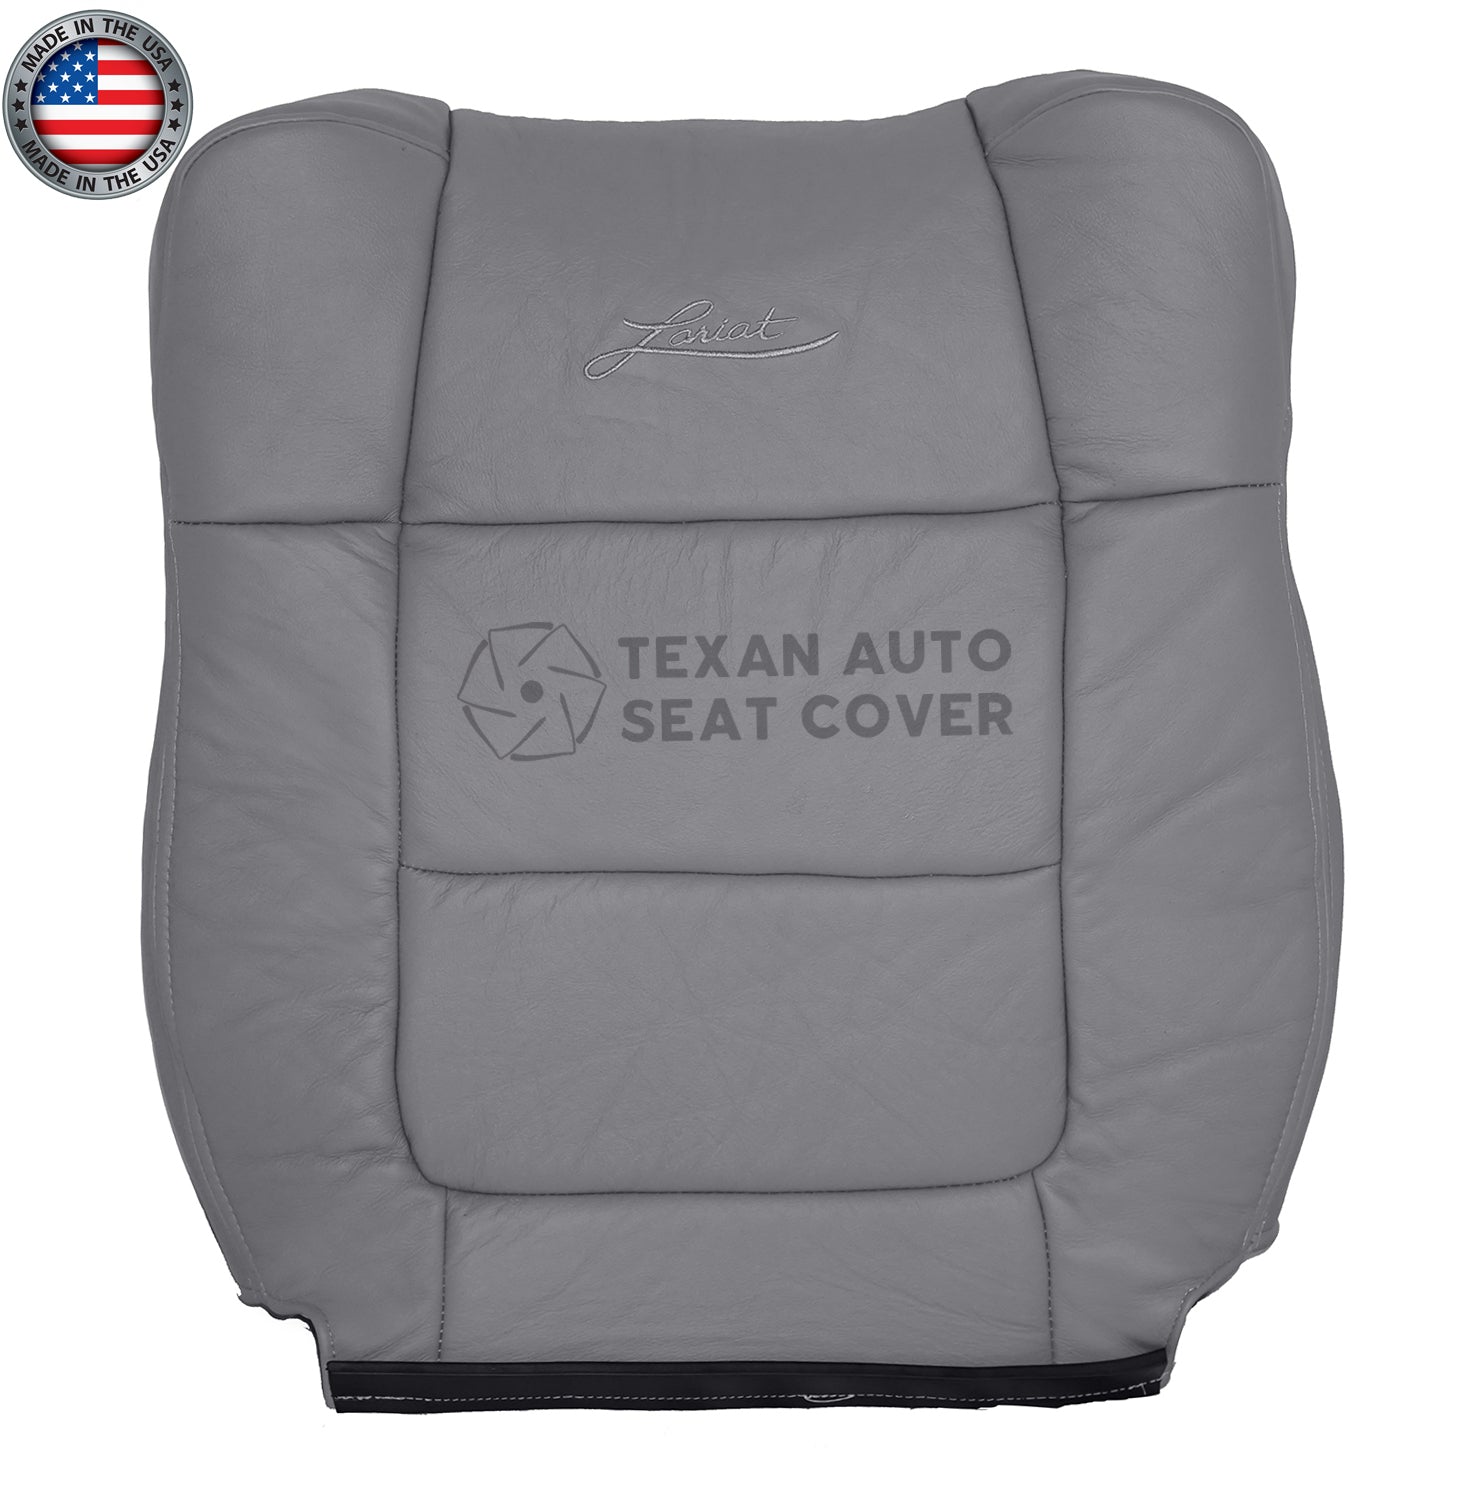 2001, 2002 Ford F150 Lariat Passenger Lean Back Synthetic Leather Seat Cover Gray